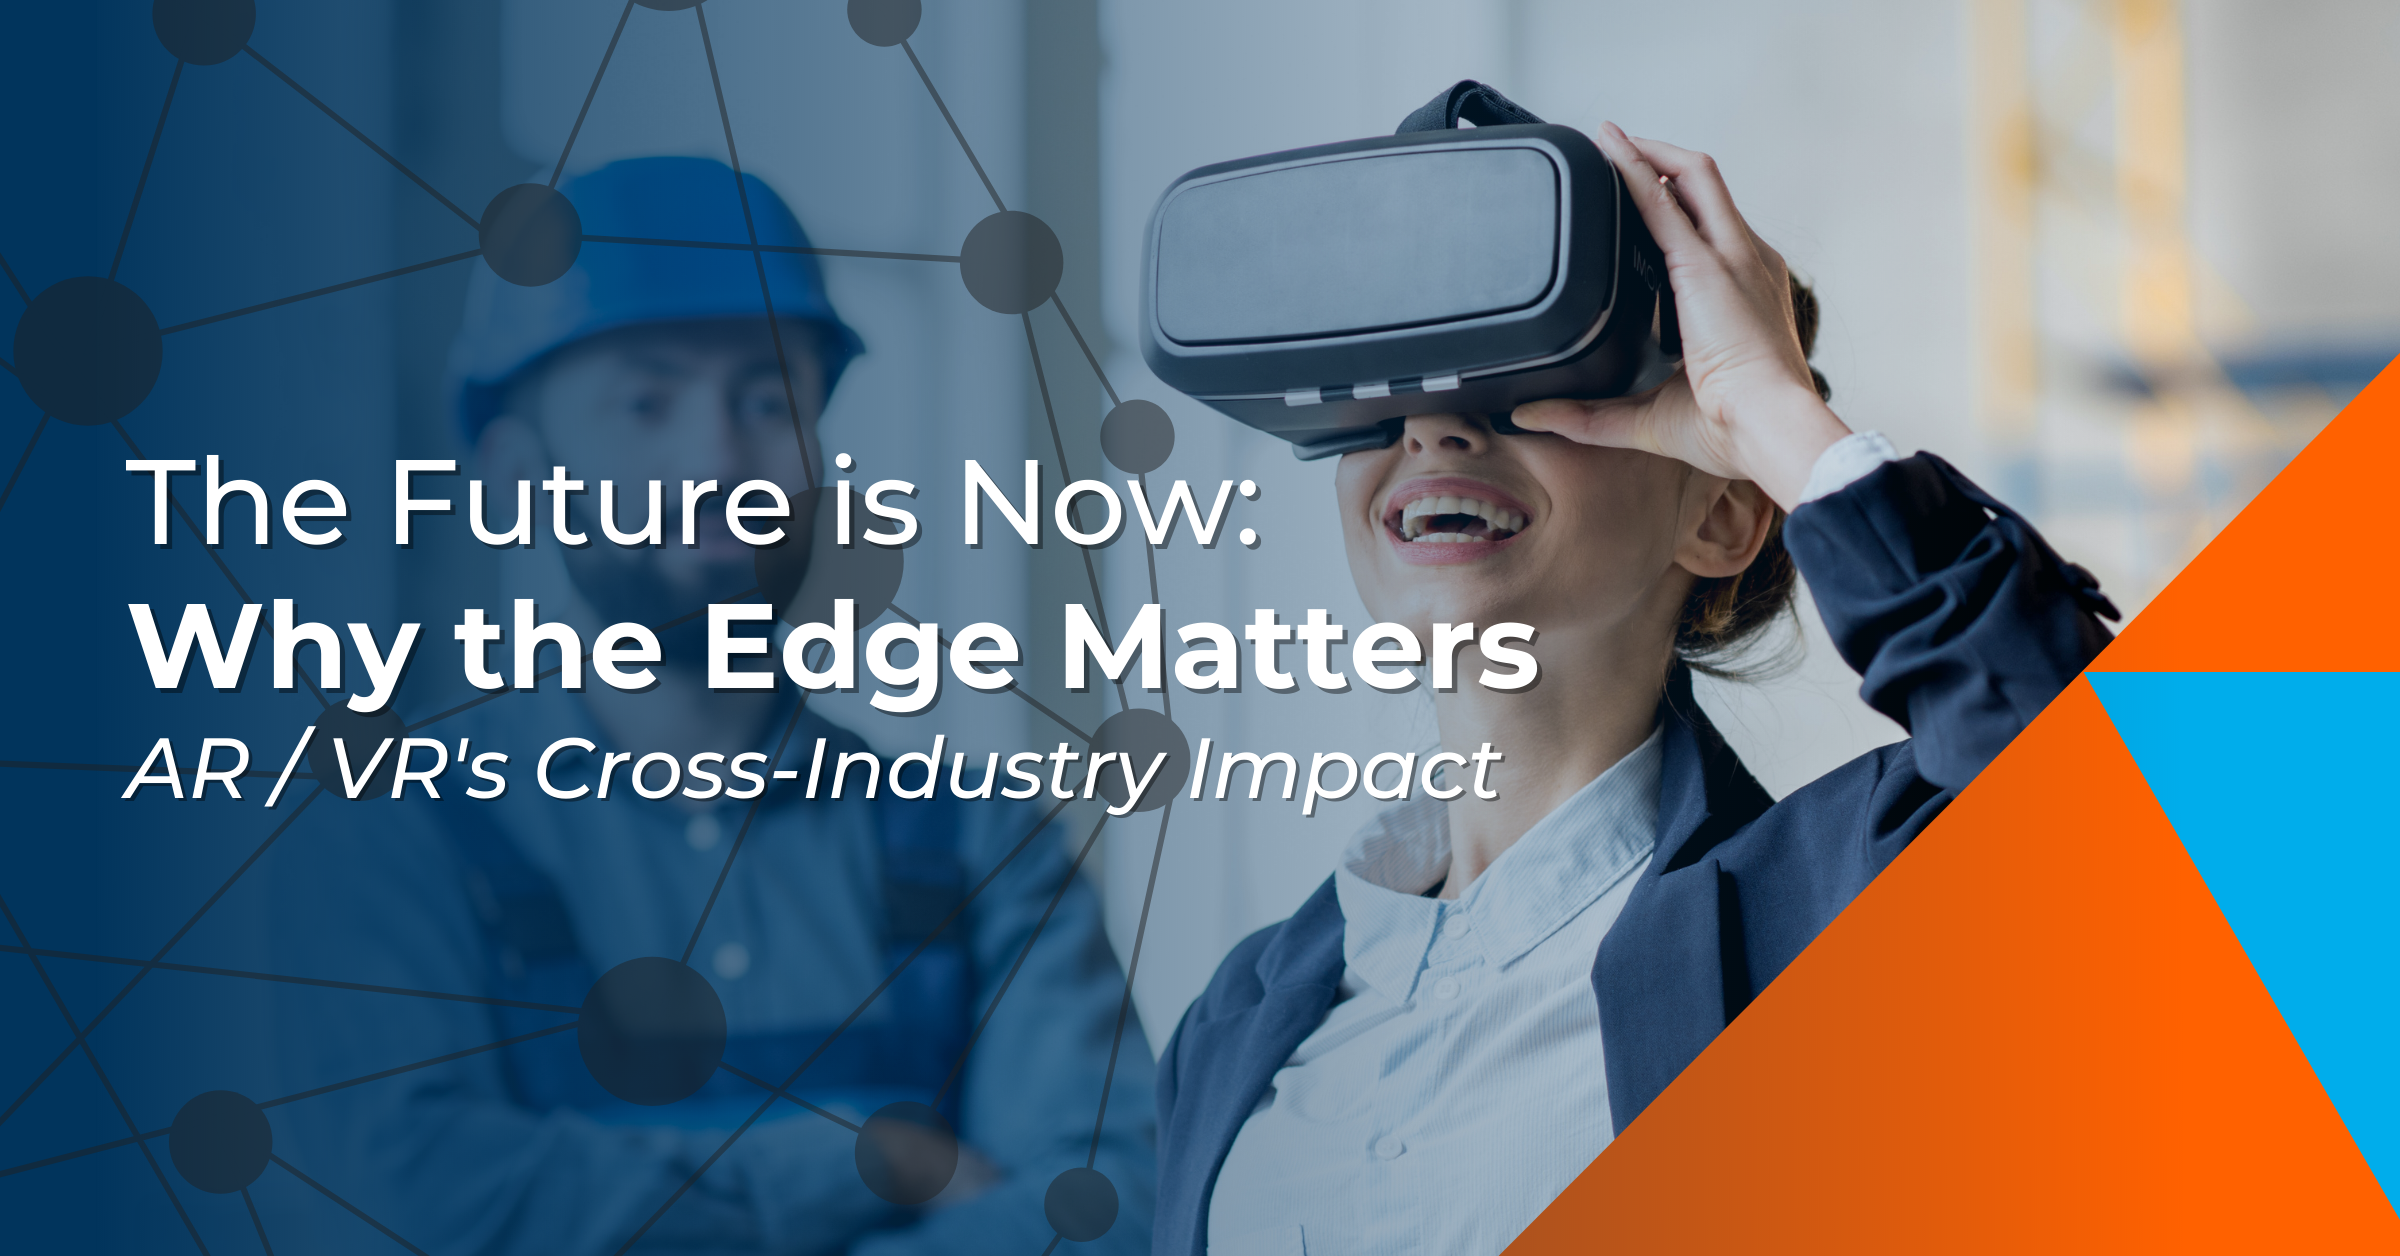 Why the Edge Matters to AR/VR Cross-Industry Impact